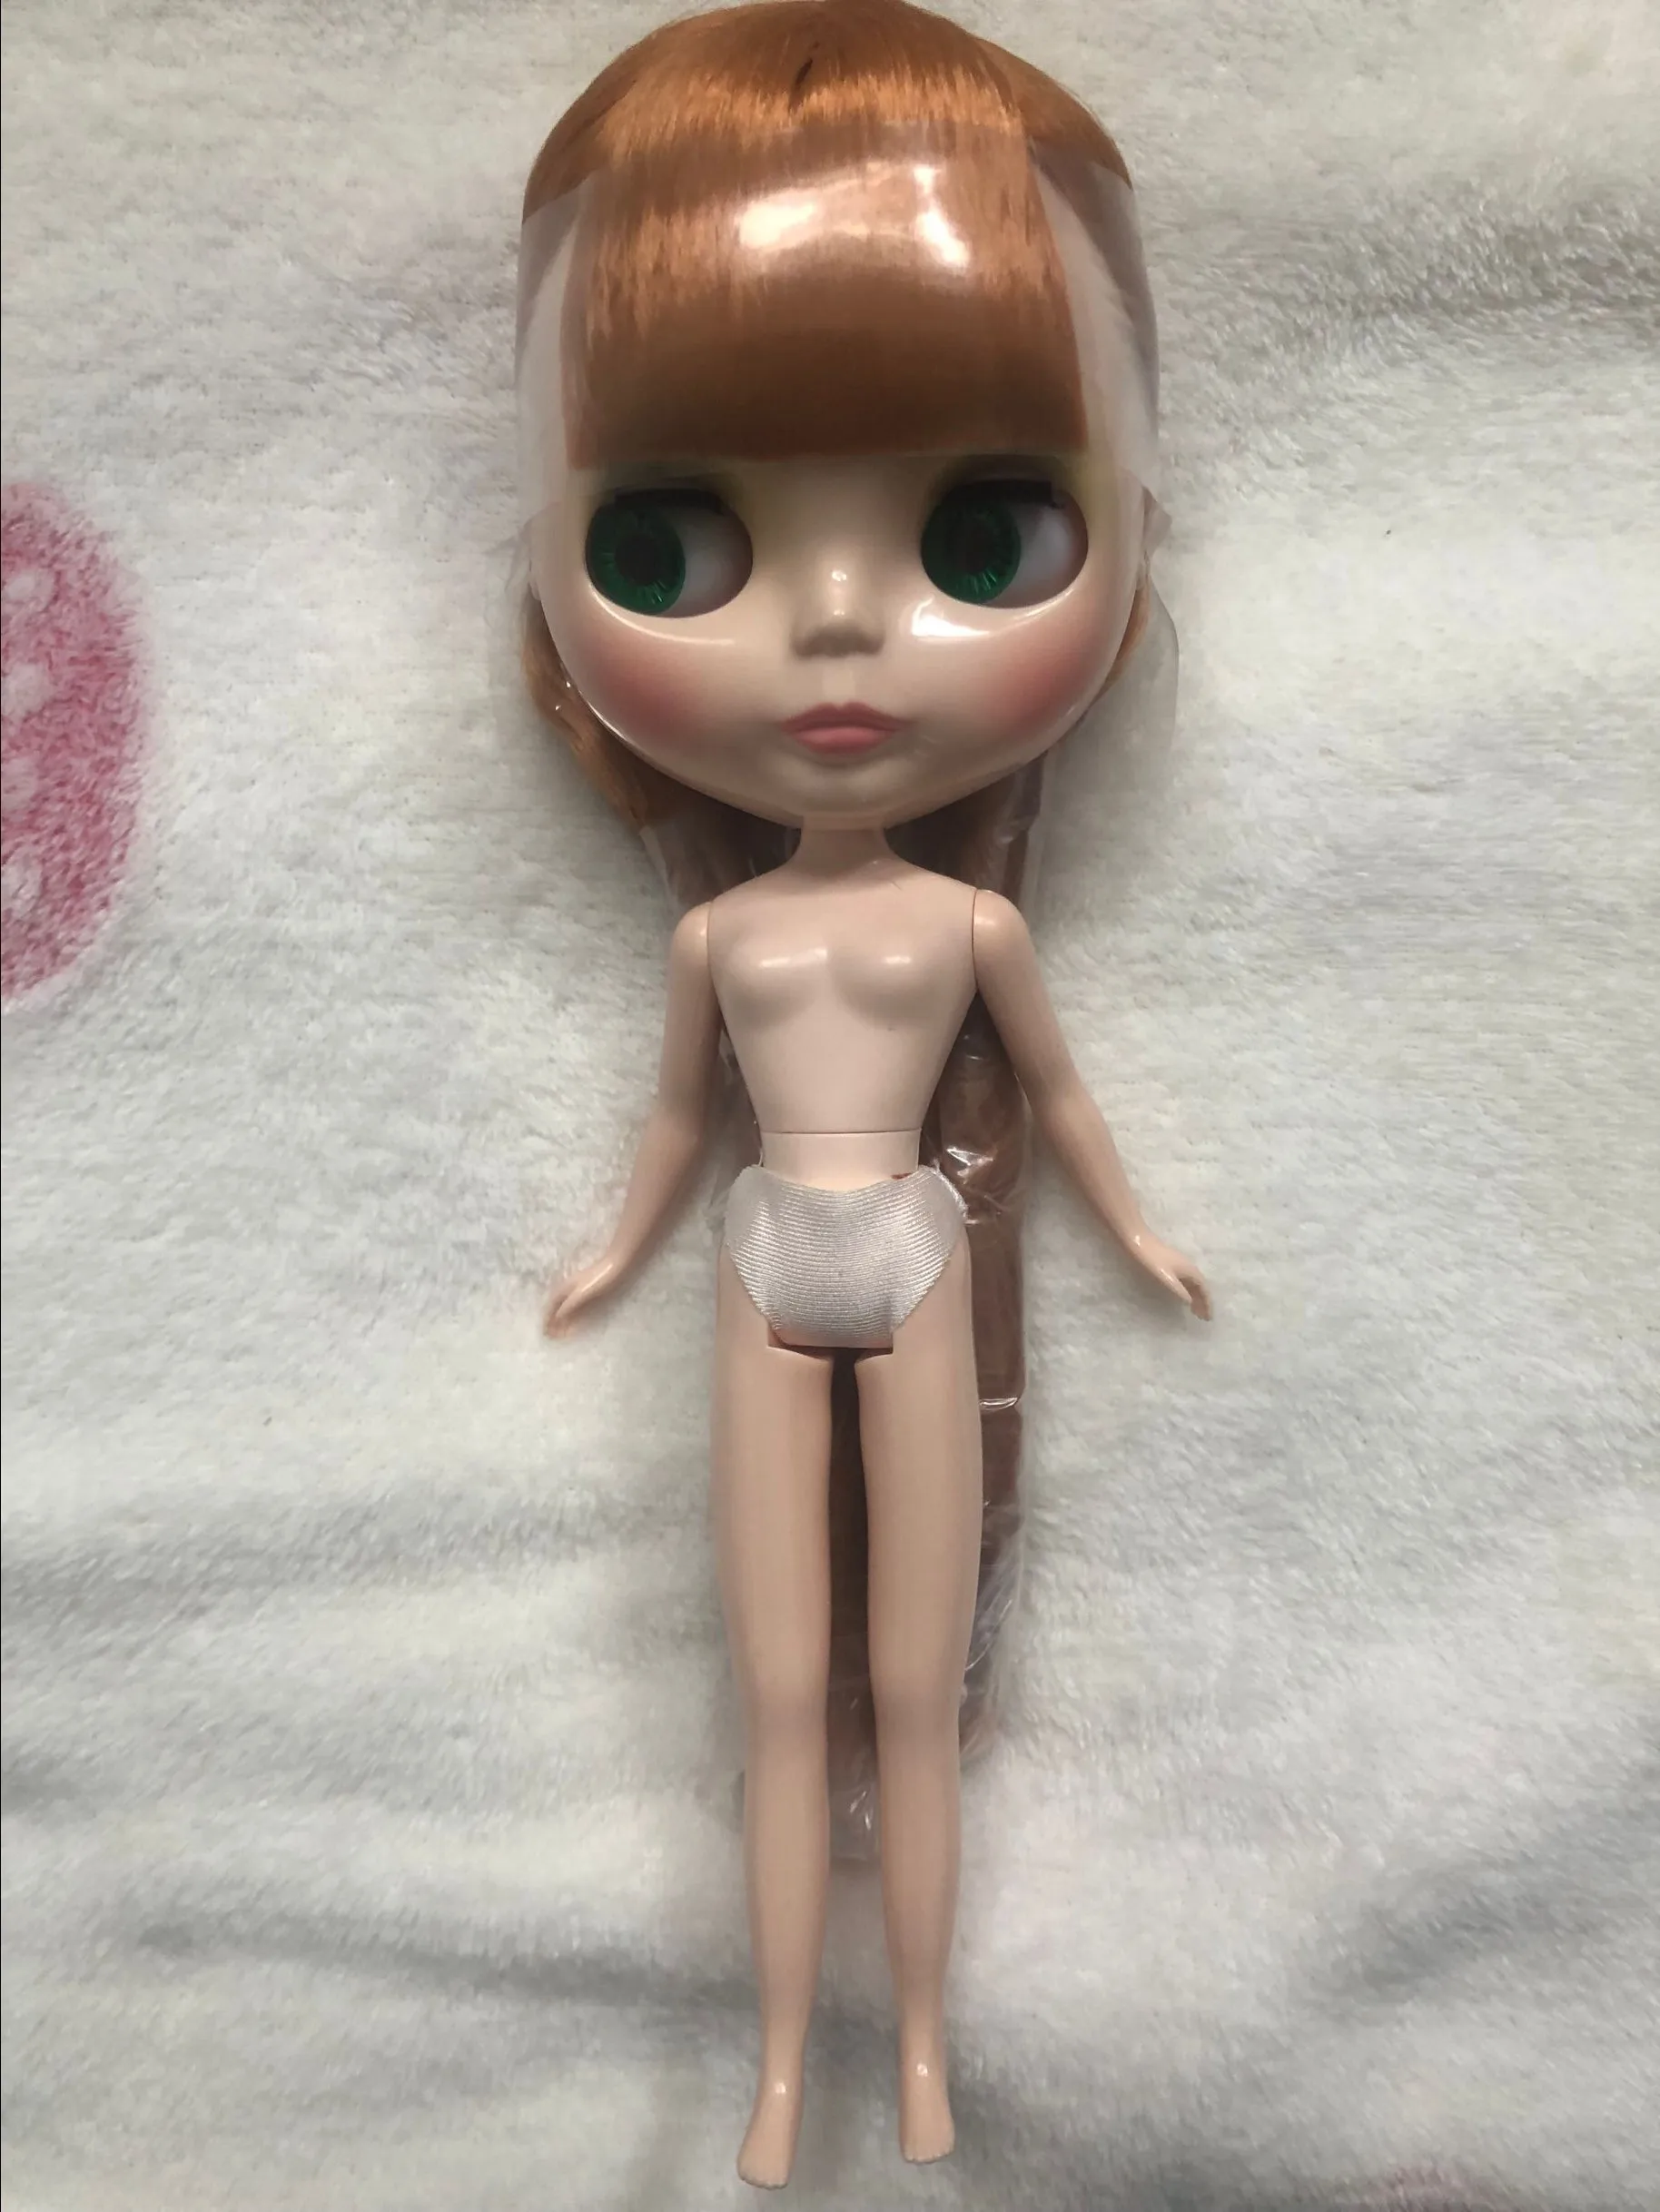 12" Neo Blythe Doll Matte Skin Face from Factory Special Body Nude Doll JSW64011 